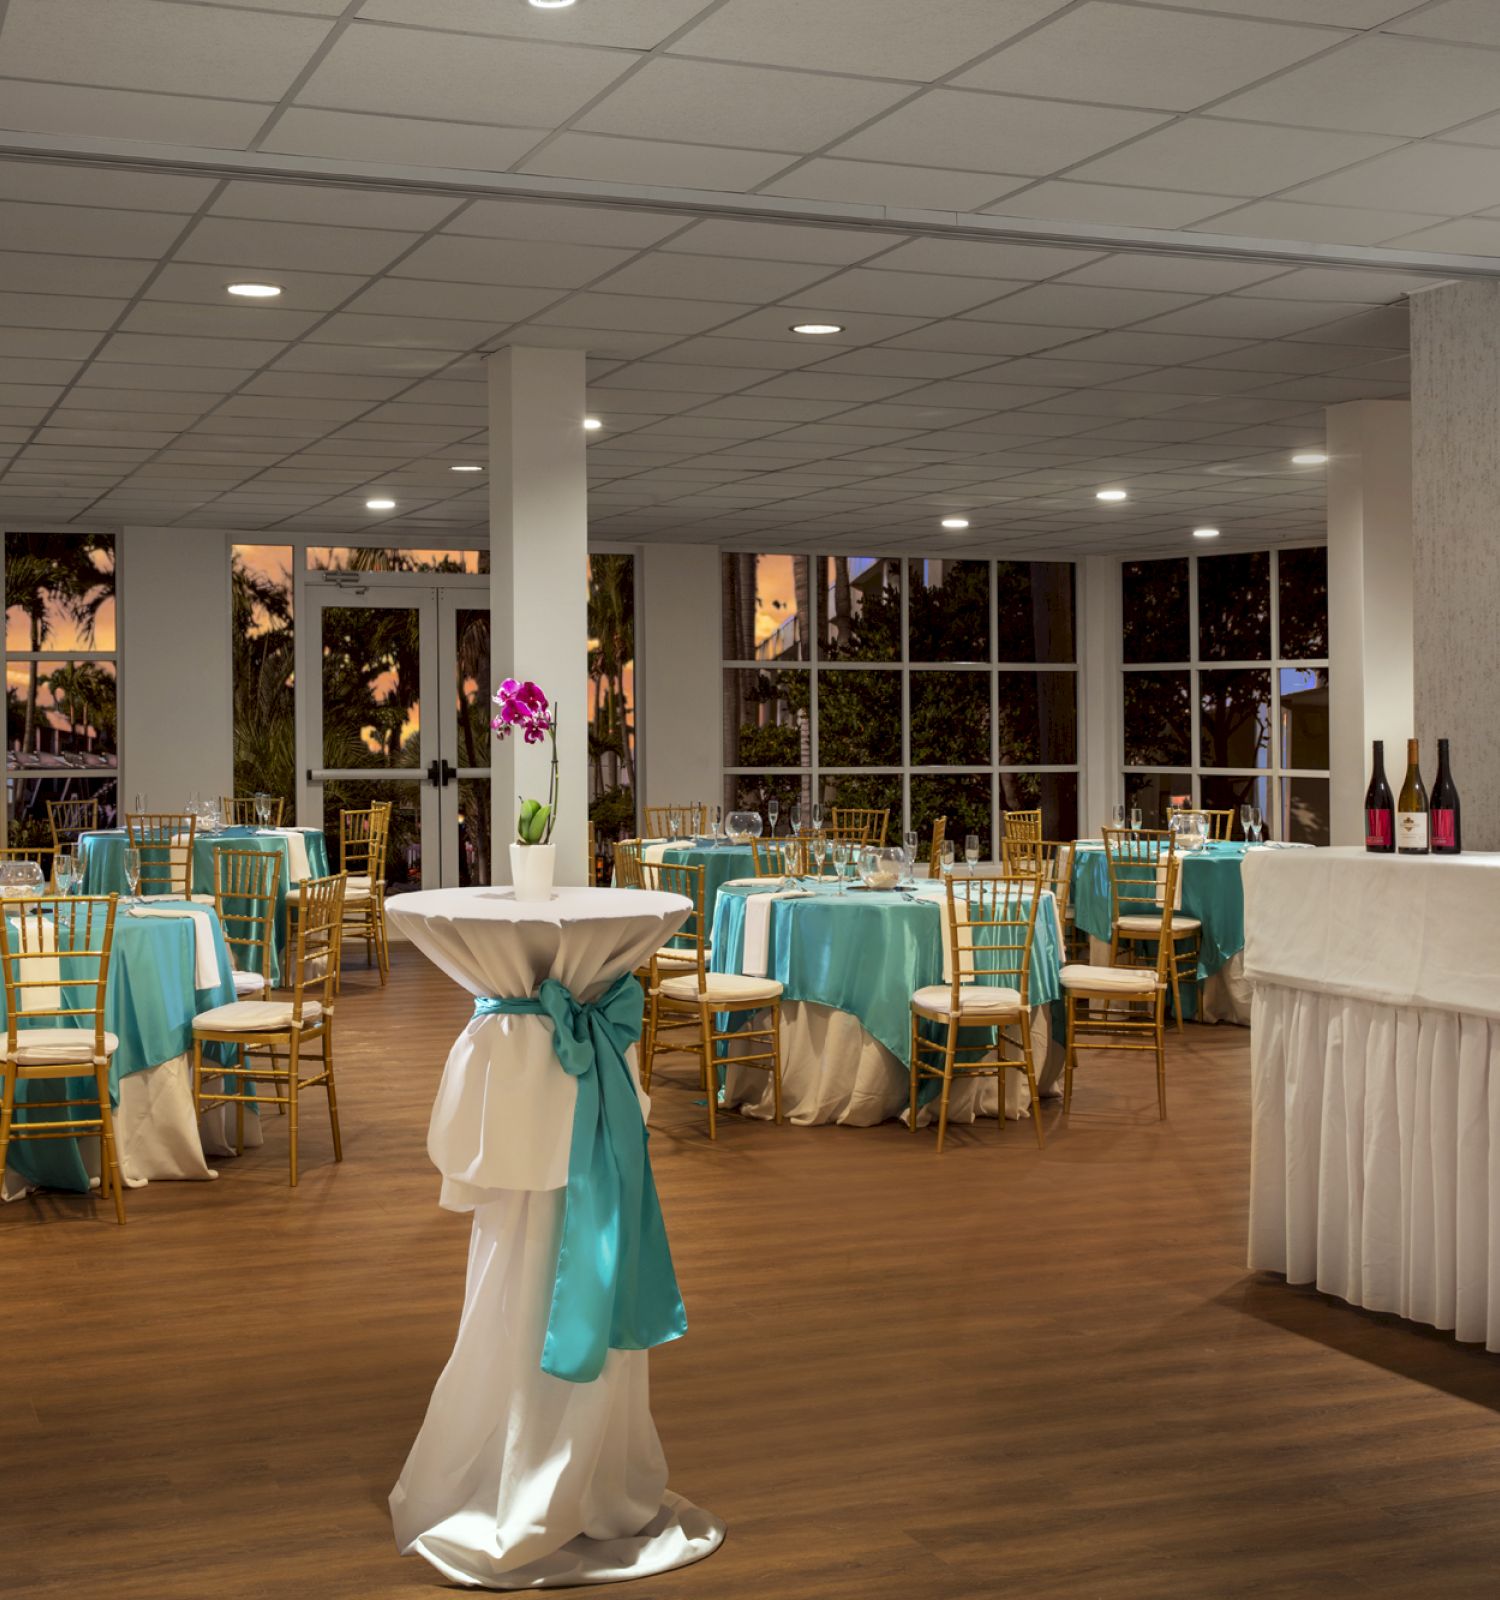 The image shows an event space with round tables covered in turquoise and white linens, high tables with decorations, and some wine bottles.